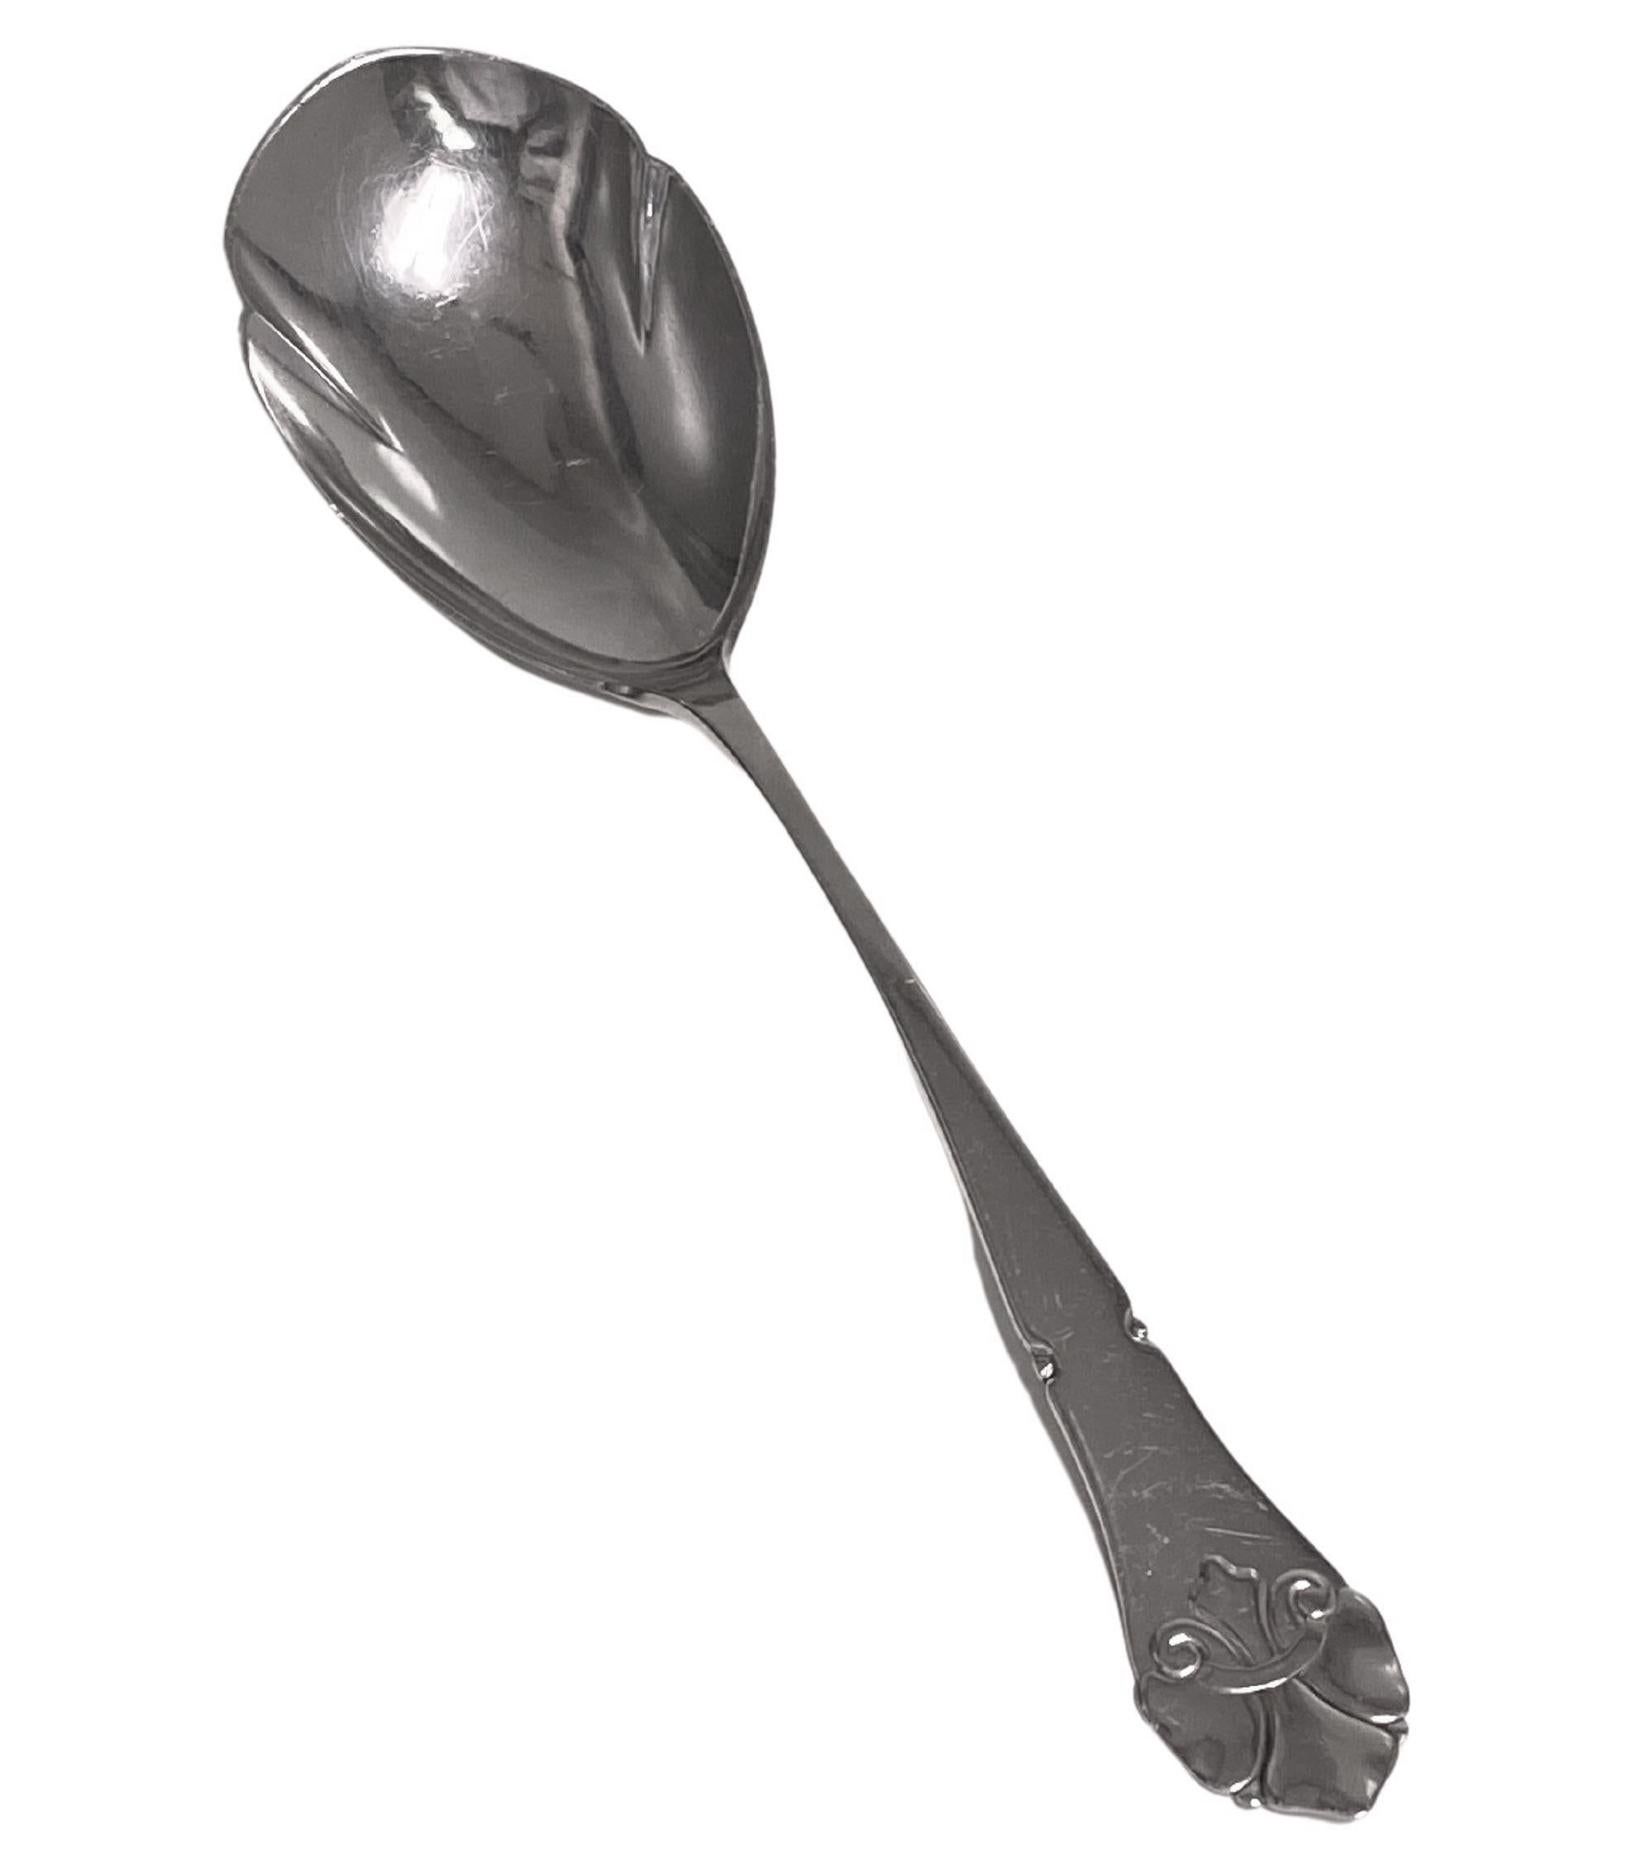 Danish Silver Arts Crafts Nouveau style Serving Spoon 1925. Stylised handle with tulip shape bow. Danish silver marks the 3 towers and 25 indicating it was made in 1925 and has the Assay master’s mark of Christian F Heise. Length: 9 7/8 inches.